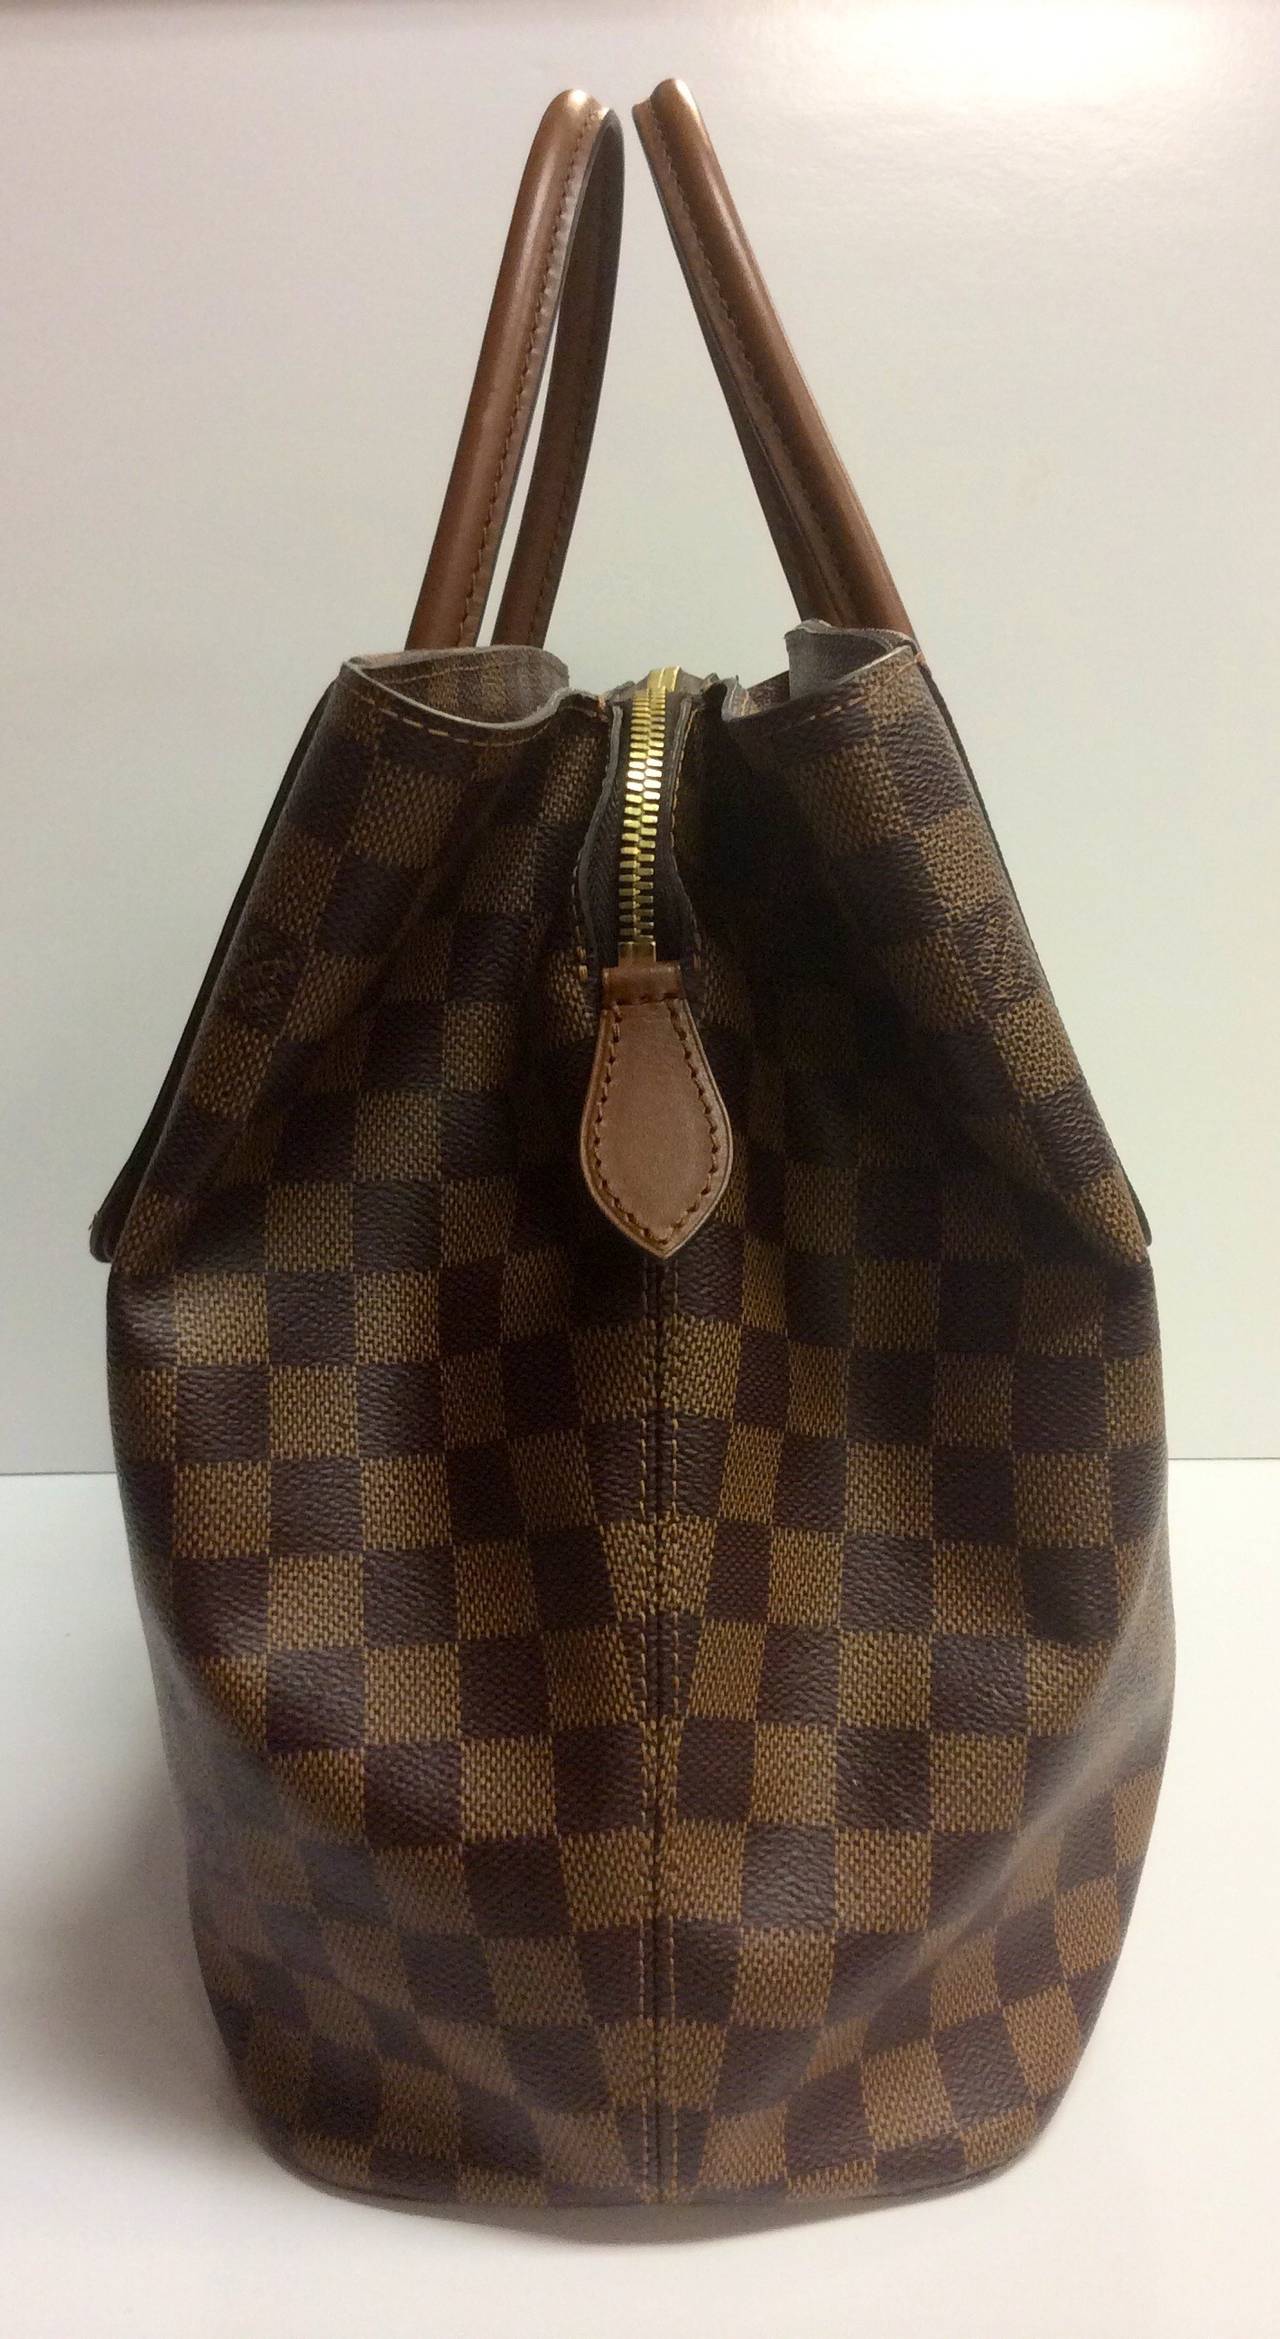 This is a Louis Vuitton Ascot tote handbag.
Crafted from an exceptional combination of Louis Vuitton's historic Damier canvas and Nomade calf leather, the Ascot bag is a sophisticated design whose elegant exterior conceals a roomy, compartmented